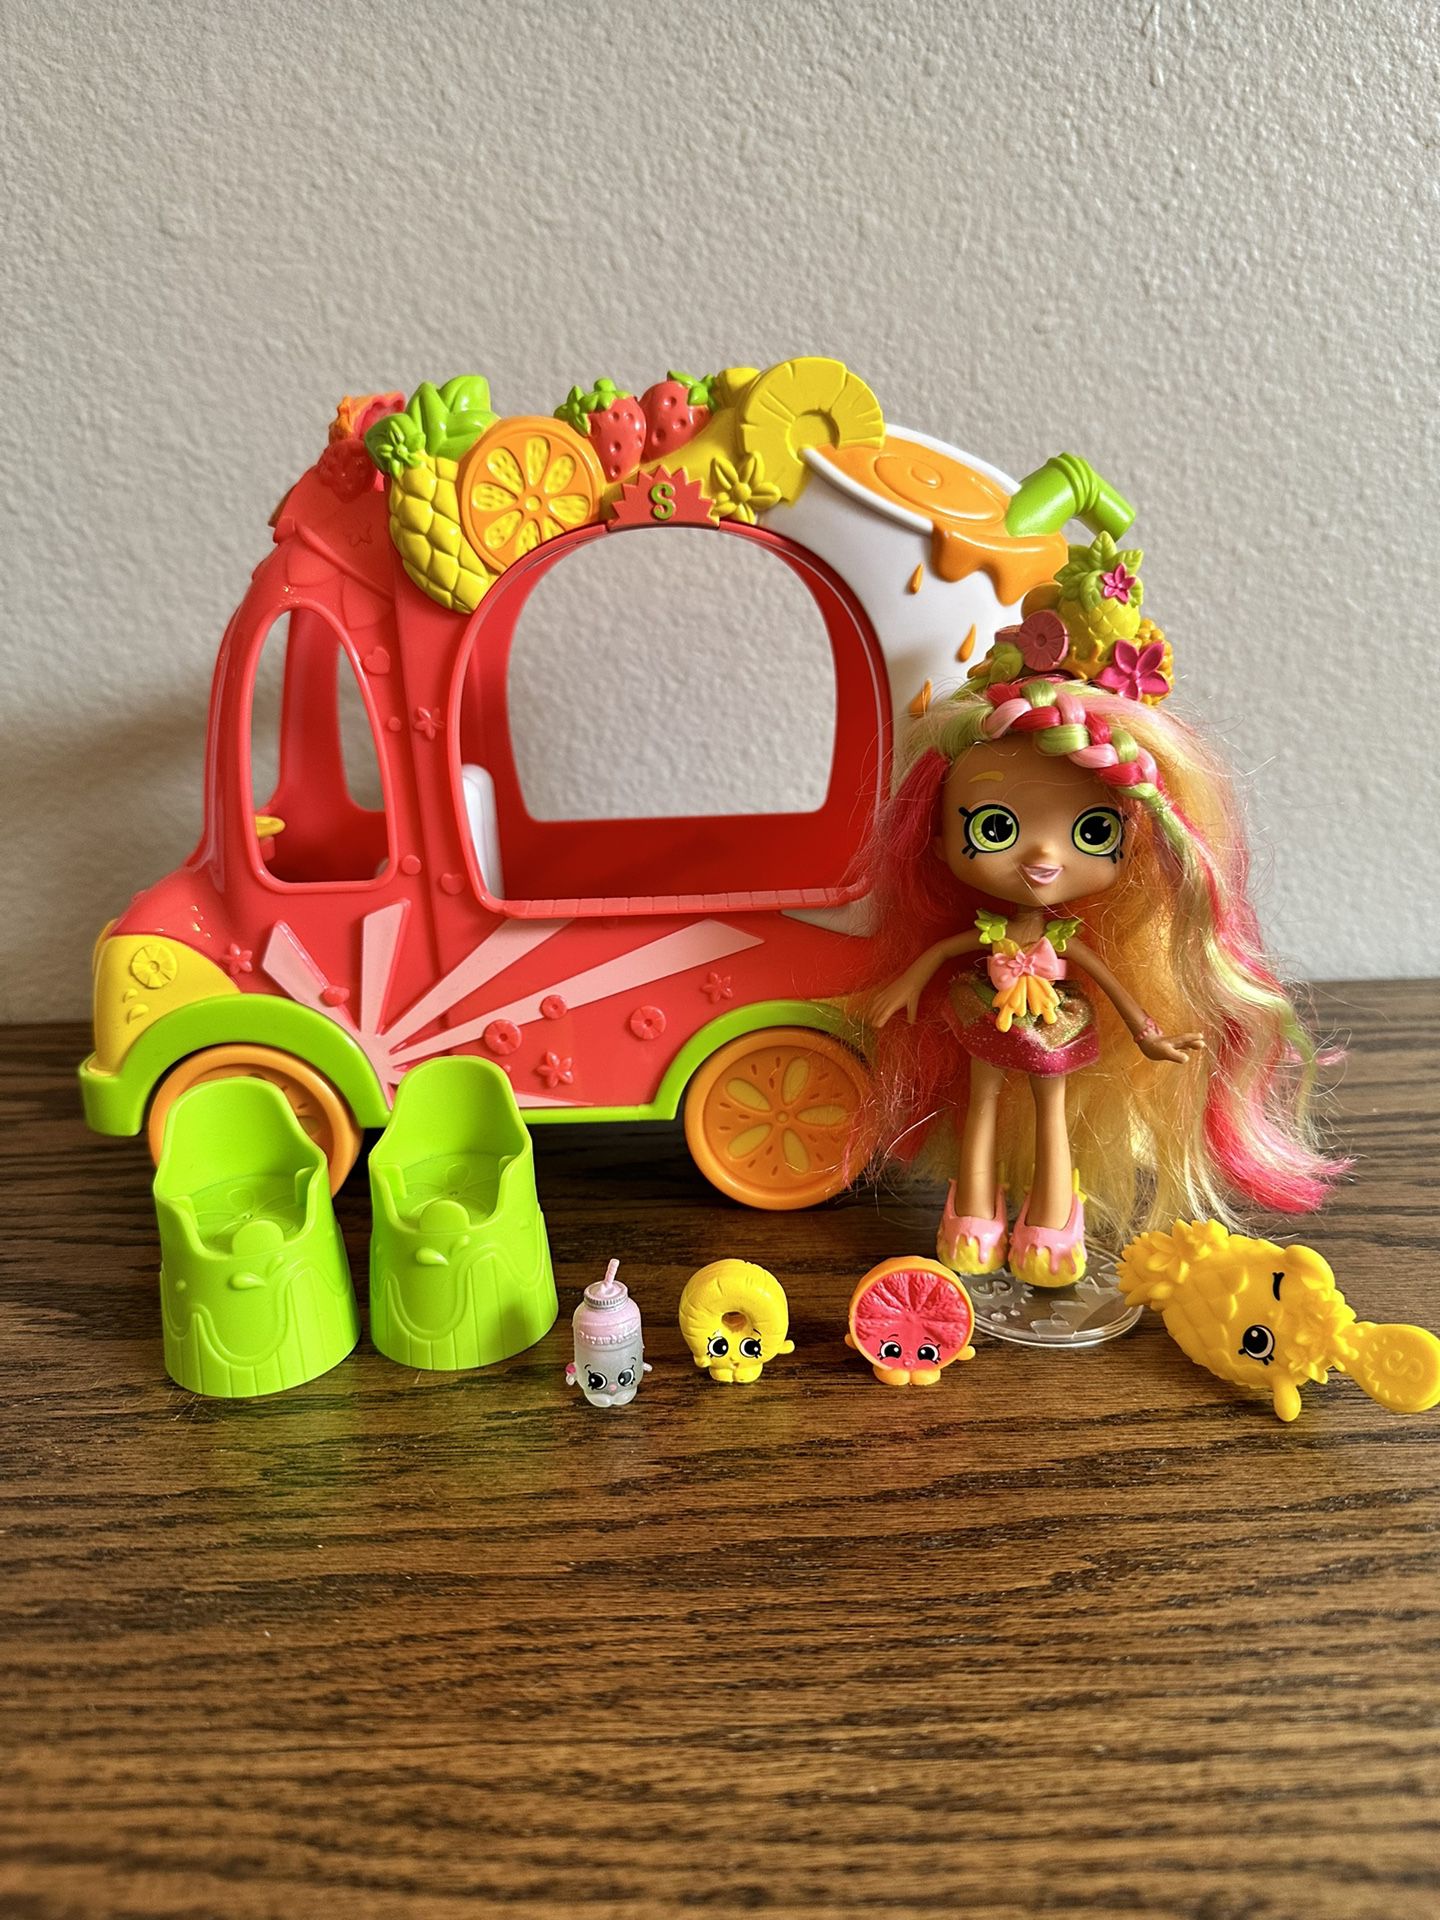 Shopkins Shoppies Pineapple Lily with Smoothie Truck Playset